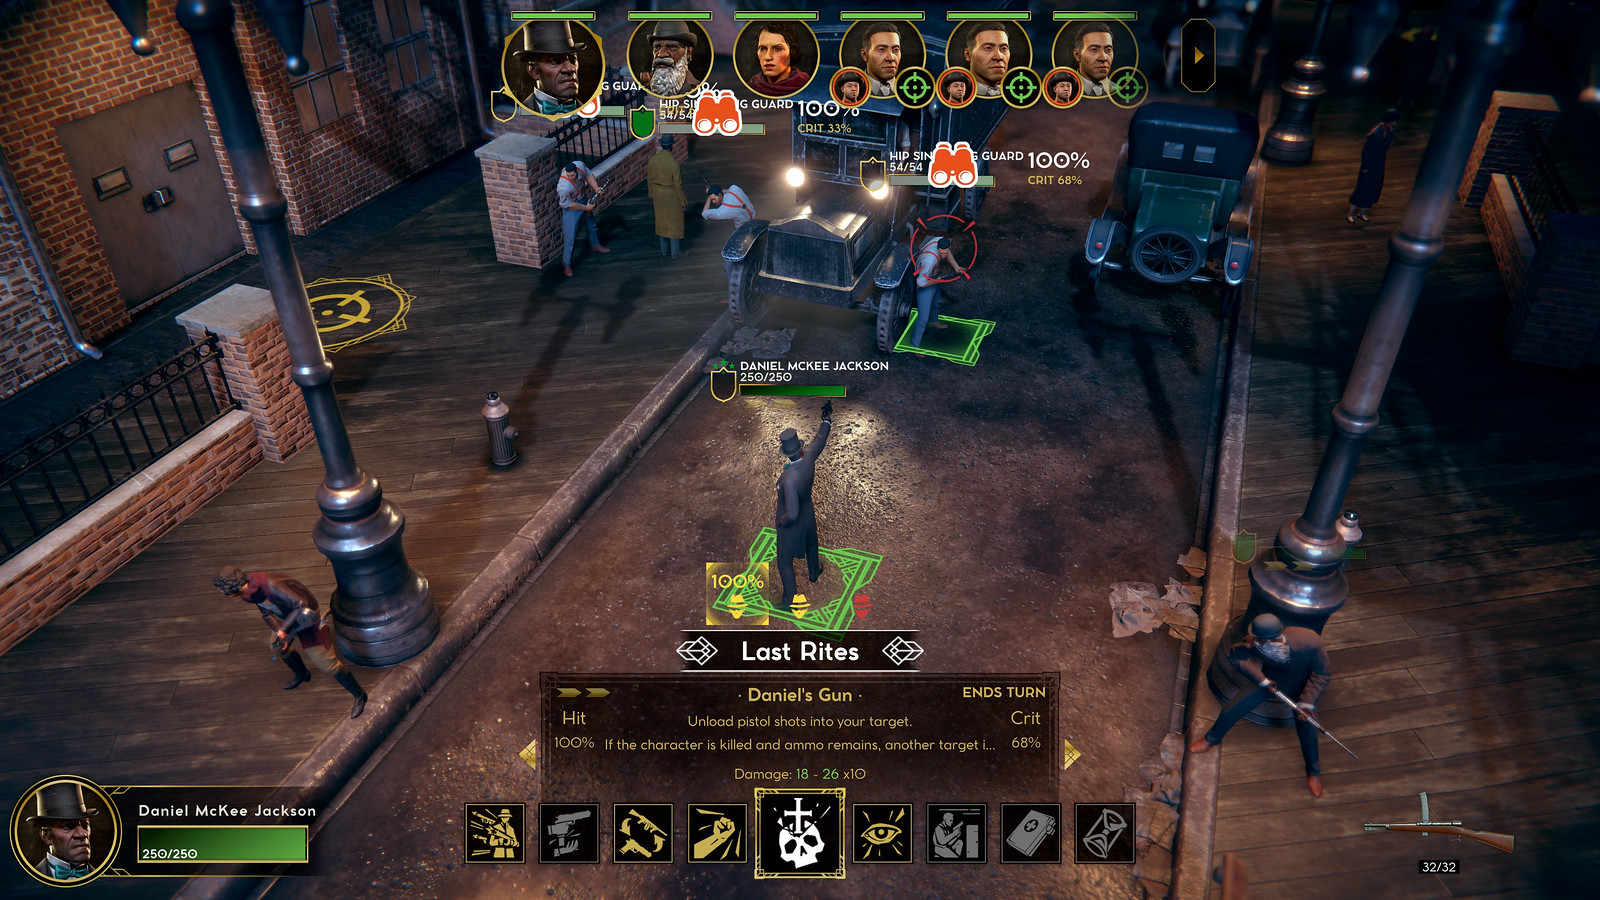 Meet the criminal masterminds you’ll play as in Empire of Sin